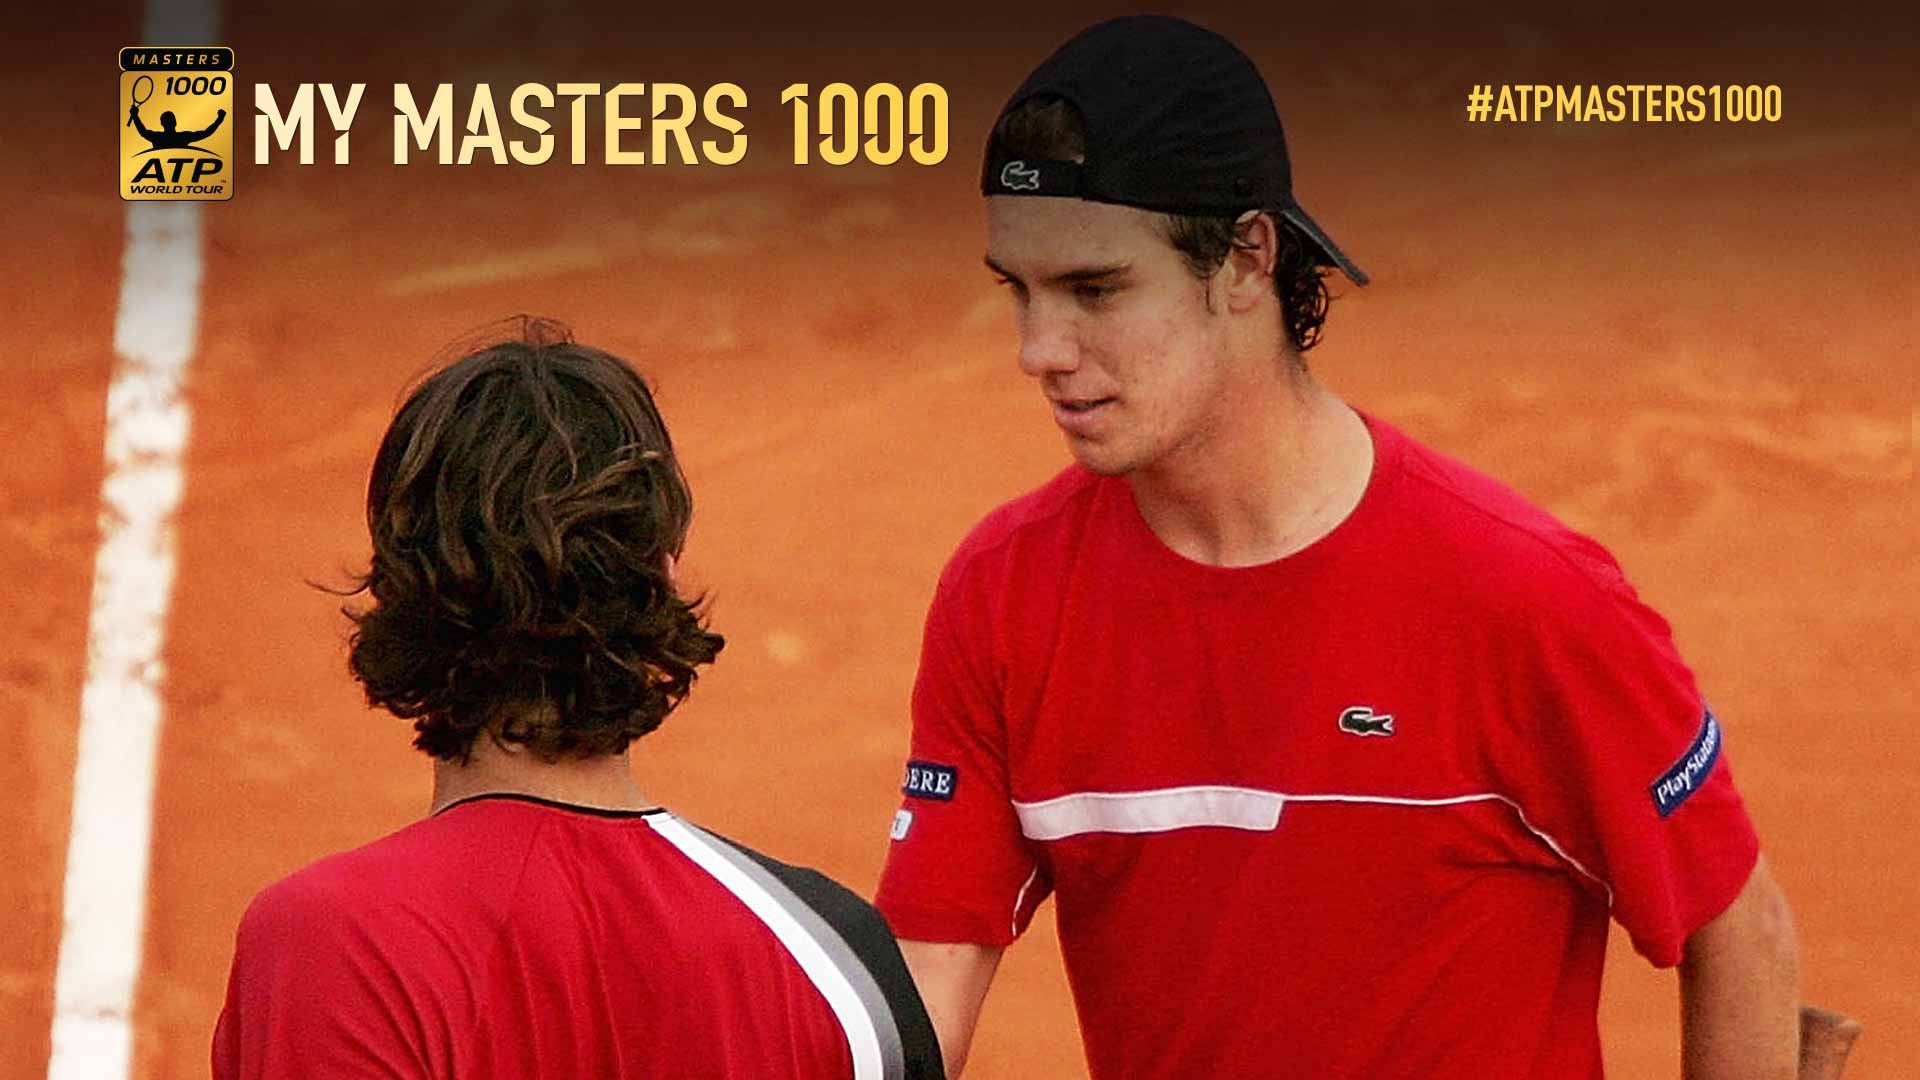 An 18-year-old Richard Gasquet upset World No. 1 Roger Federer in the quarter-finals of the 2005 Monte-Carlo Rolex Masters.